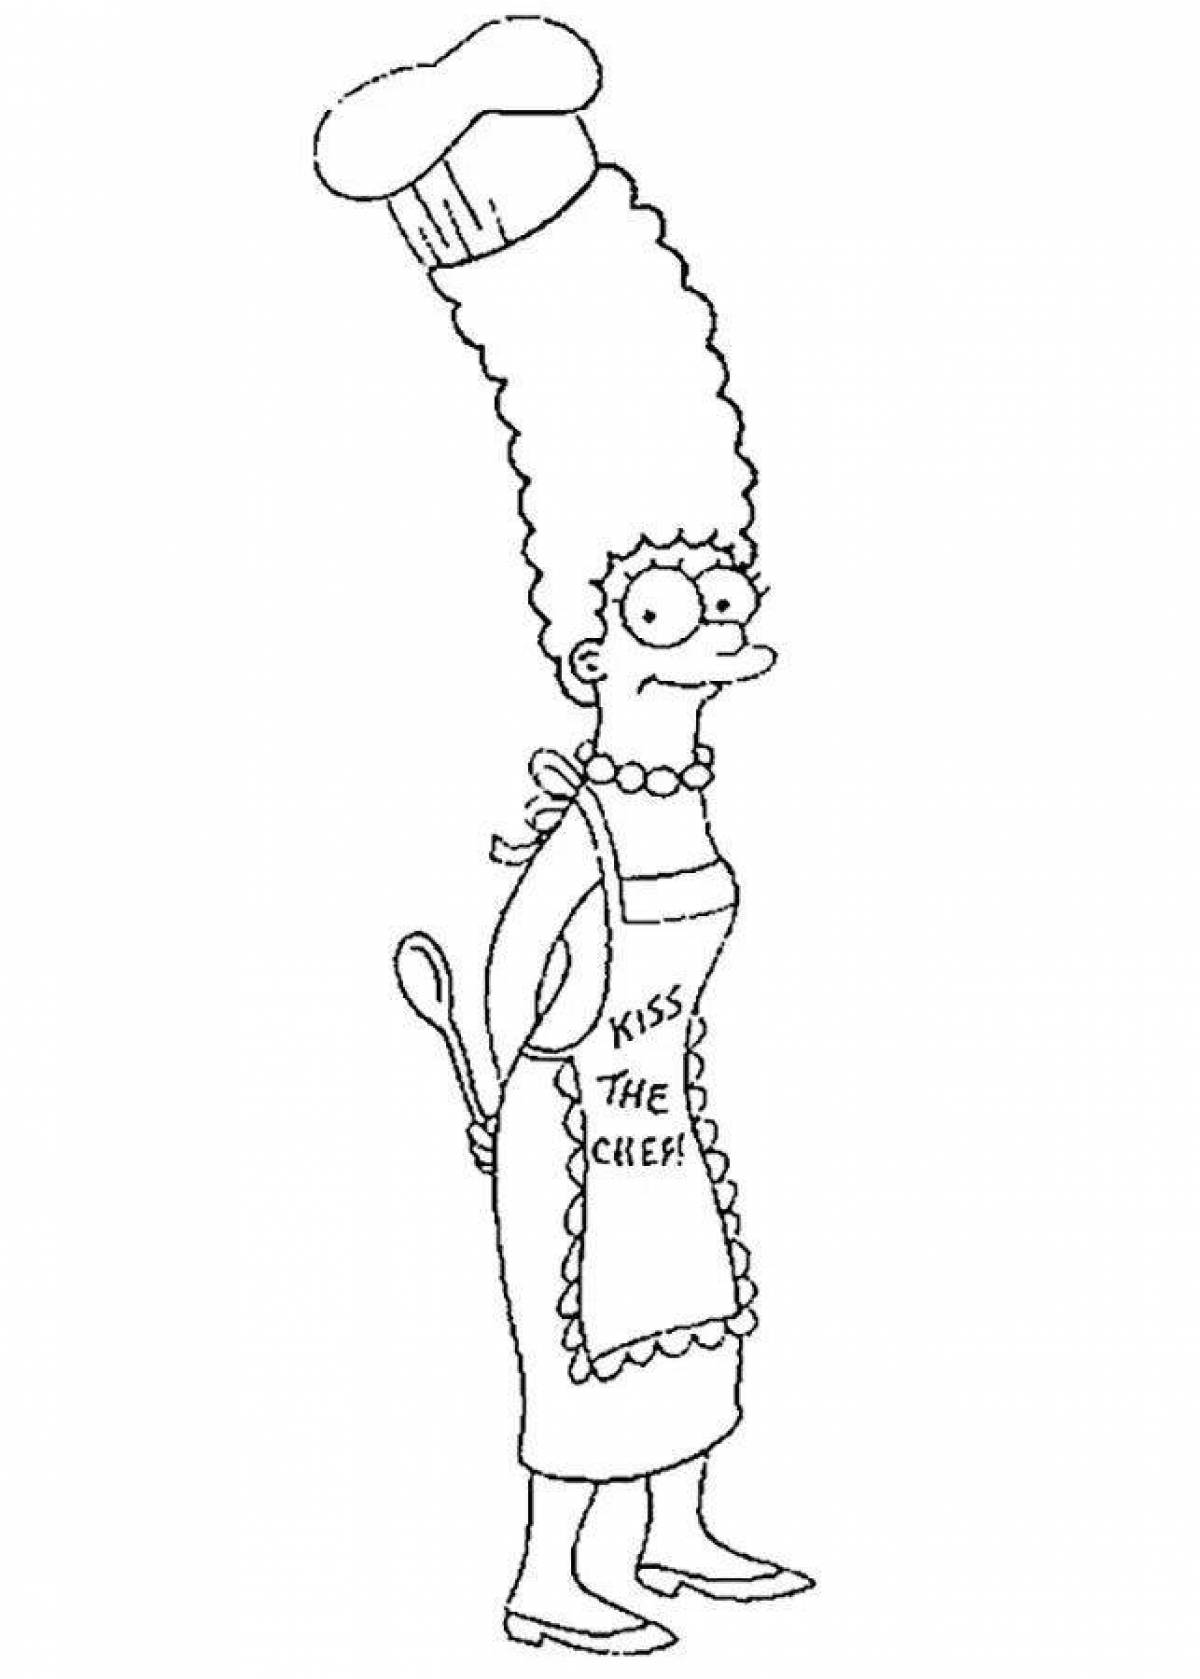 Marge simpson funny coloring book